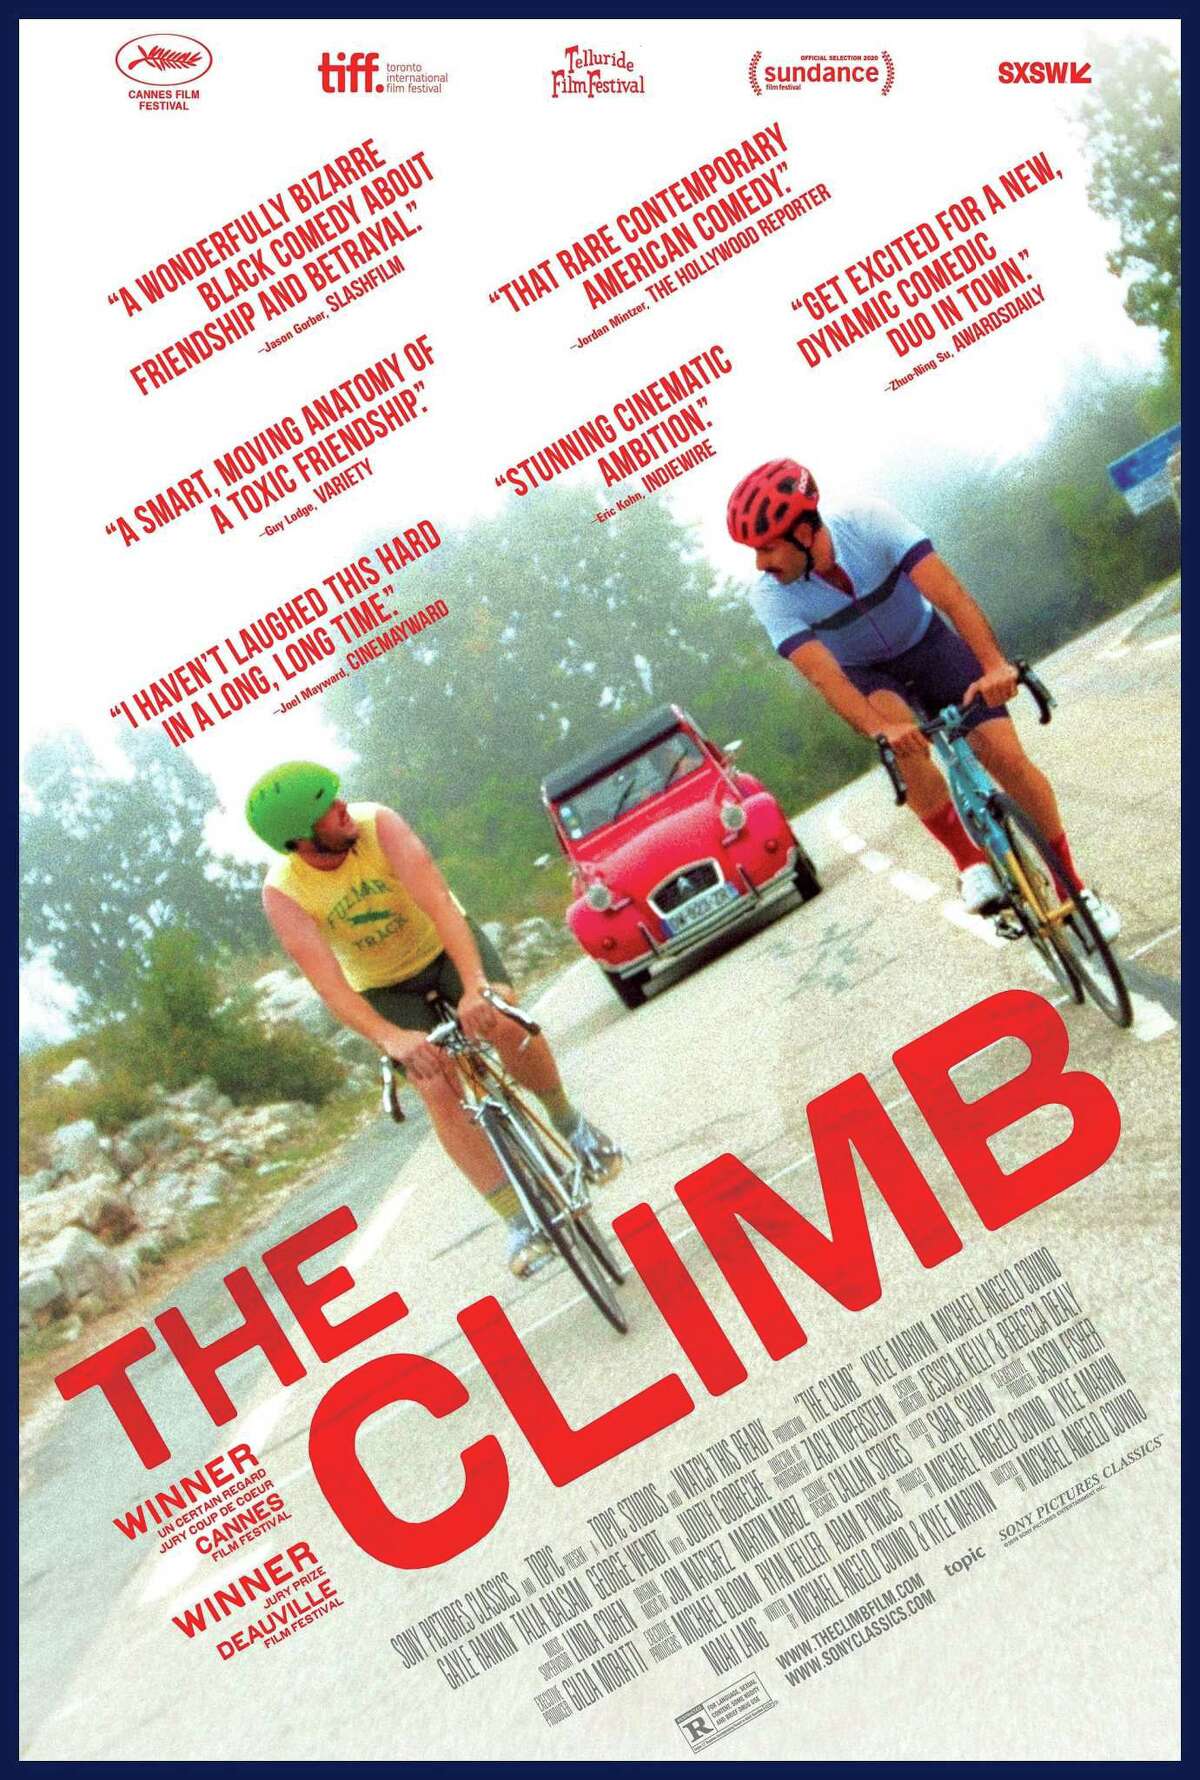 "The Climb," written and directed by Michael Angelo Covino of New Canaan, who also starred in the film, opens Friday, Nov. 13. The feature-length version of “The Climb” premiered in 2019 at the Cannes Film Festival, winning a jury award. “It was about as wild and crazy a premiere of a first film as you can expect. It was the wildest premiere we ever could have imagined,” Covino said of walking the red carpet with Hollywood A-listers and meeting Quentin Tarantino at dinner. “It was a wild departure from a few months prior, with three people sitting in an empty room trying to figure out how to patch this together,” Covino said. Written in early 2018, “The Climb” was shot that fall, with a few scenes finished in February 2019. “The trajectory of the film was pretty quick,” Covino said. After Cannes, a March 20 premiere was next up. An event at the New Canaan Playhouse was envisioned. The COVID-19 shut everything down. It put an indefinite hold on a New Canaan event. The closest venue this weekend is Bow Tie Cinemas Majestic 6 in Stamford. “I think people who know me will probably appreciate the portrayal of these types of families. It takes place kind of in this region, in the Hudson Valley area, and has this blue collar, East Coast family vibe to it,” said Covino, who splits his time among New York, New Canaan and Los Angeles. “I’m a little nomadic,” he said.